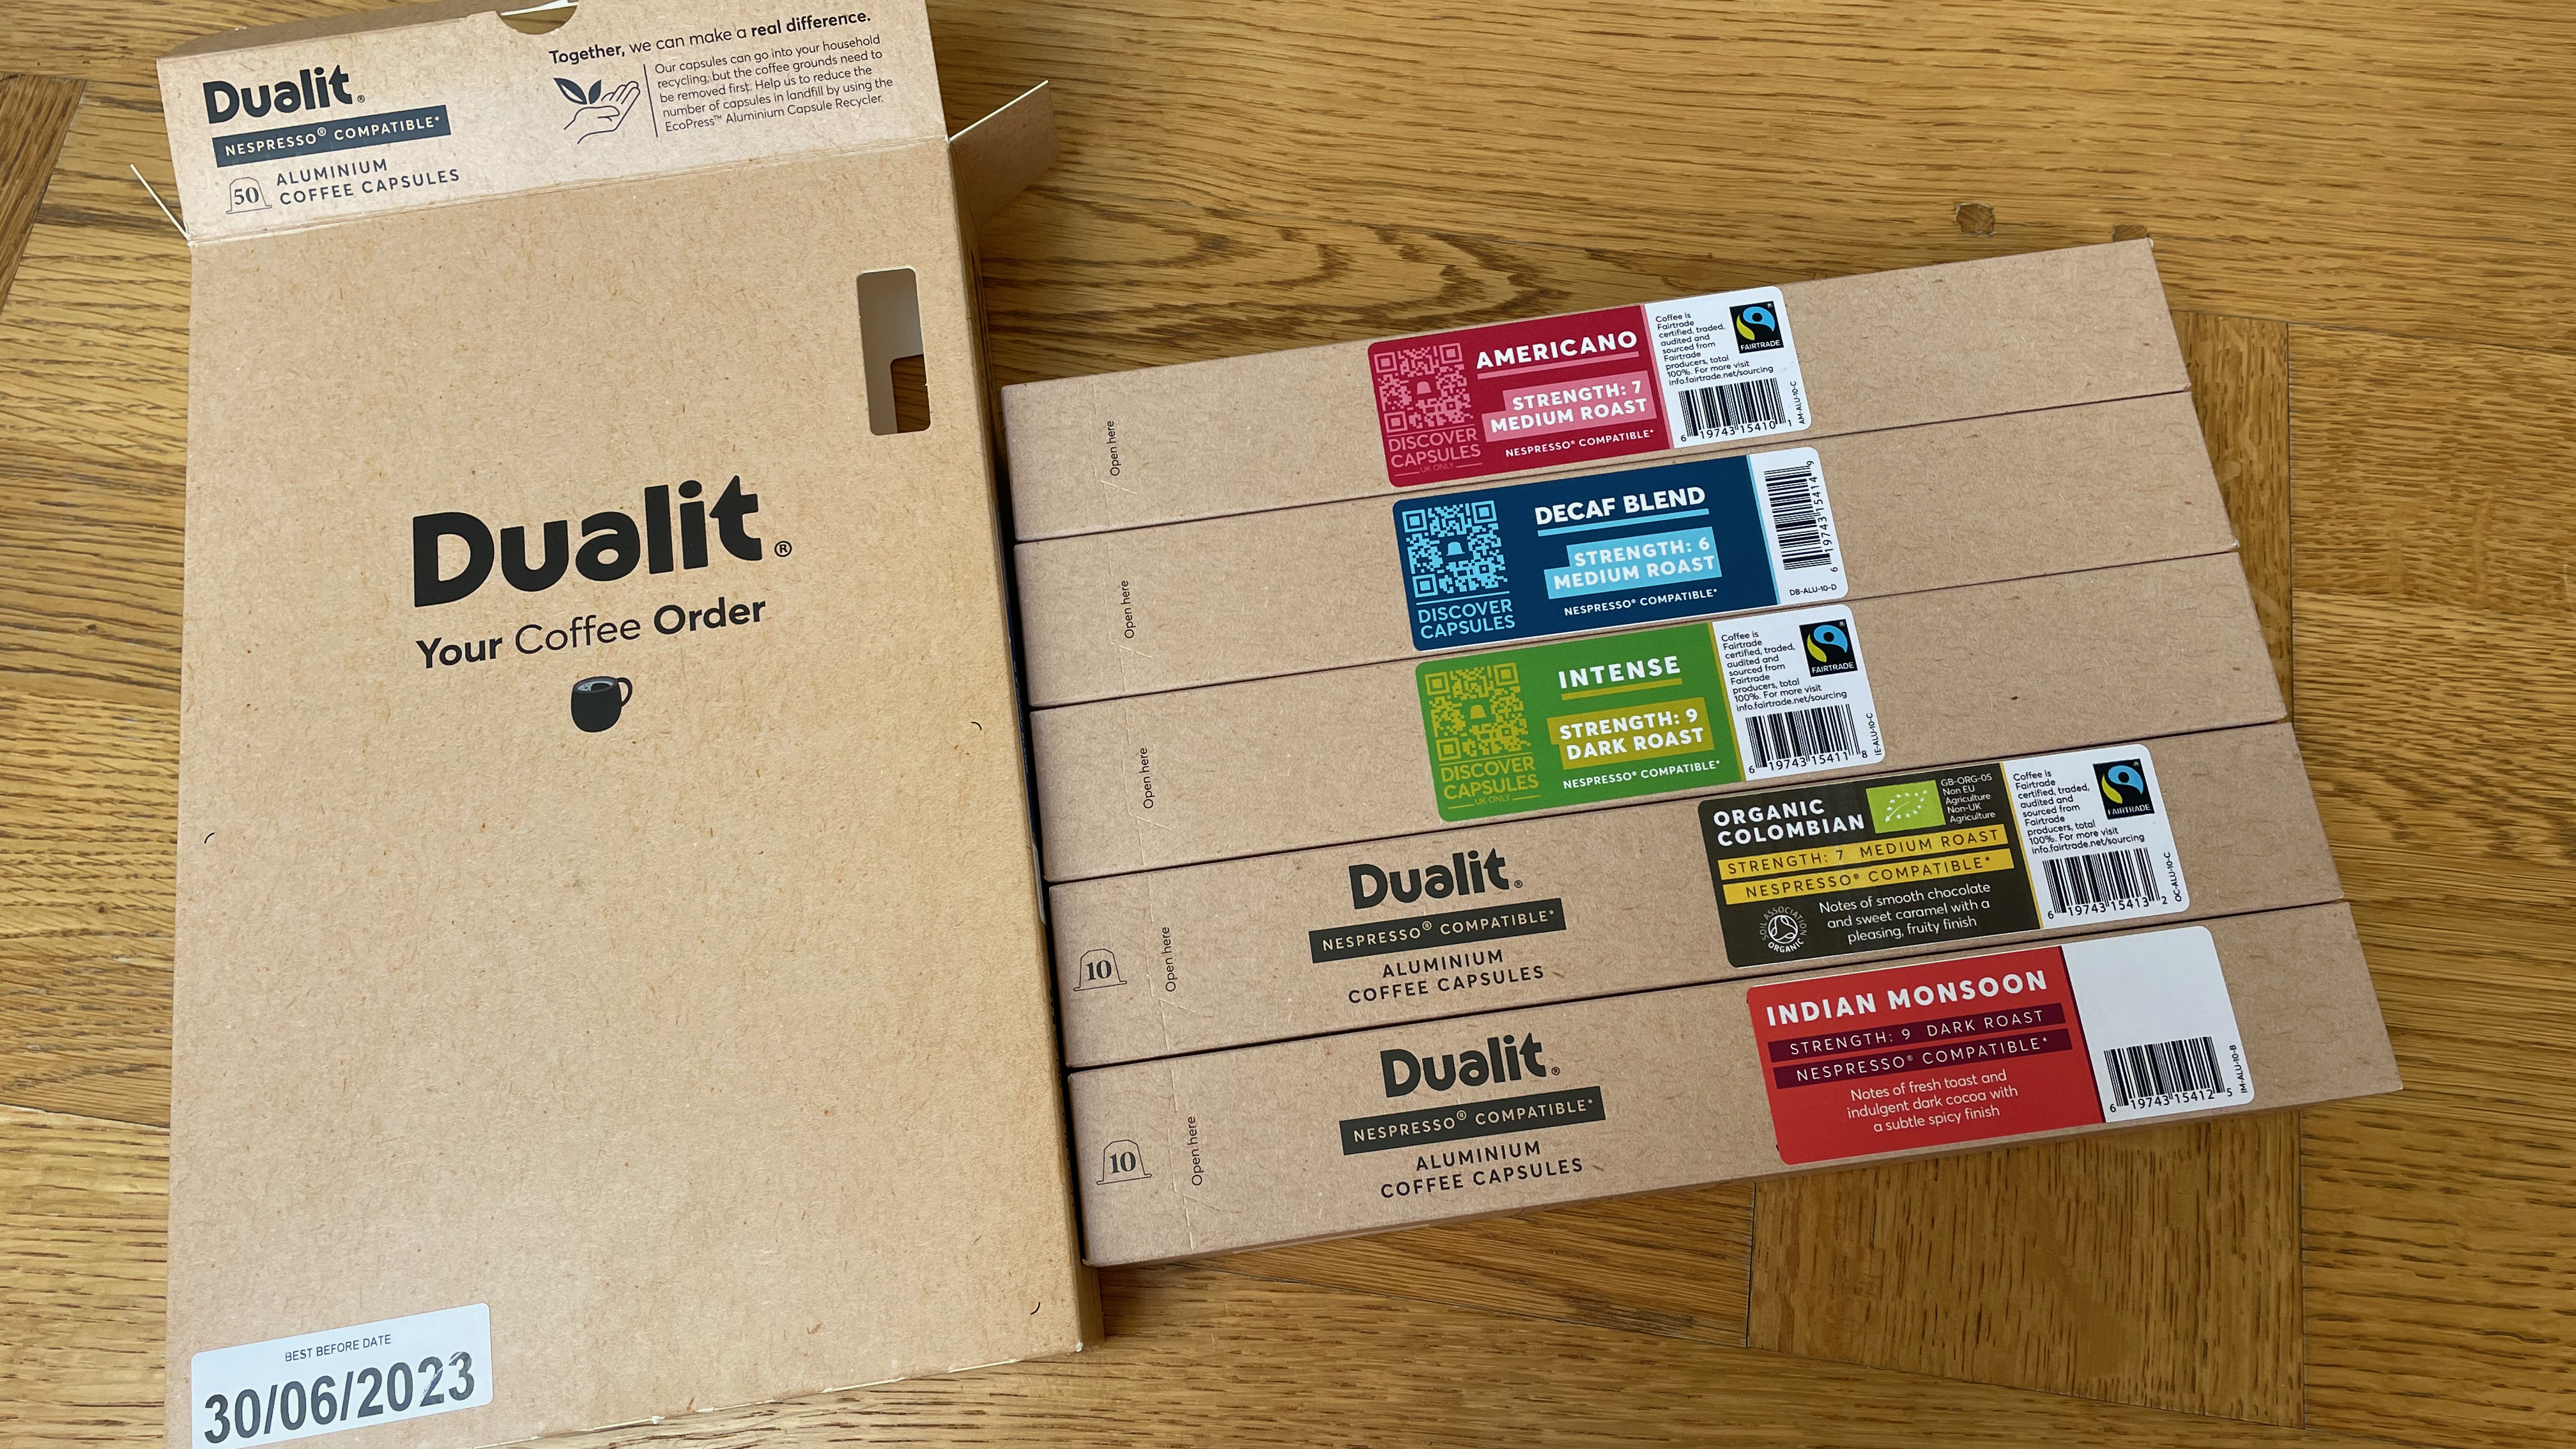 Image of Dualit coffee pods